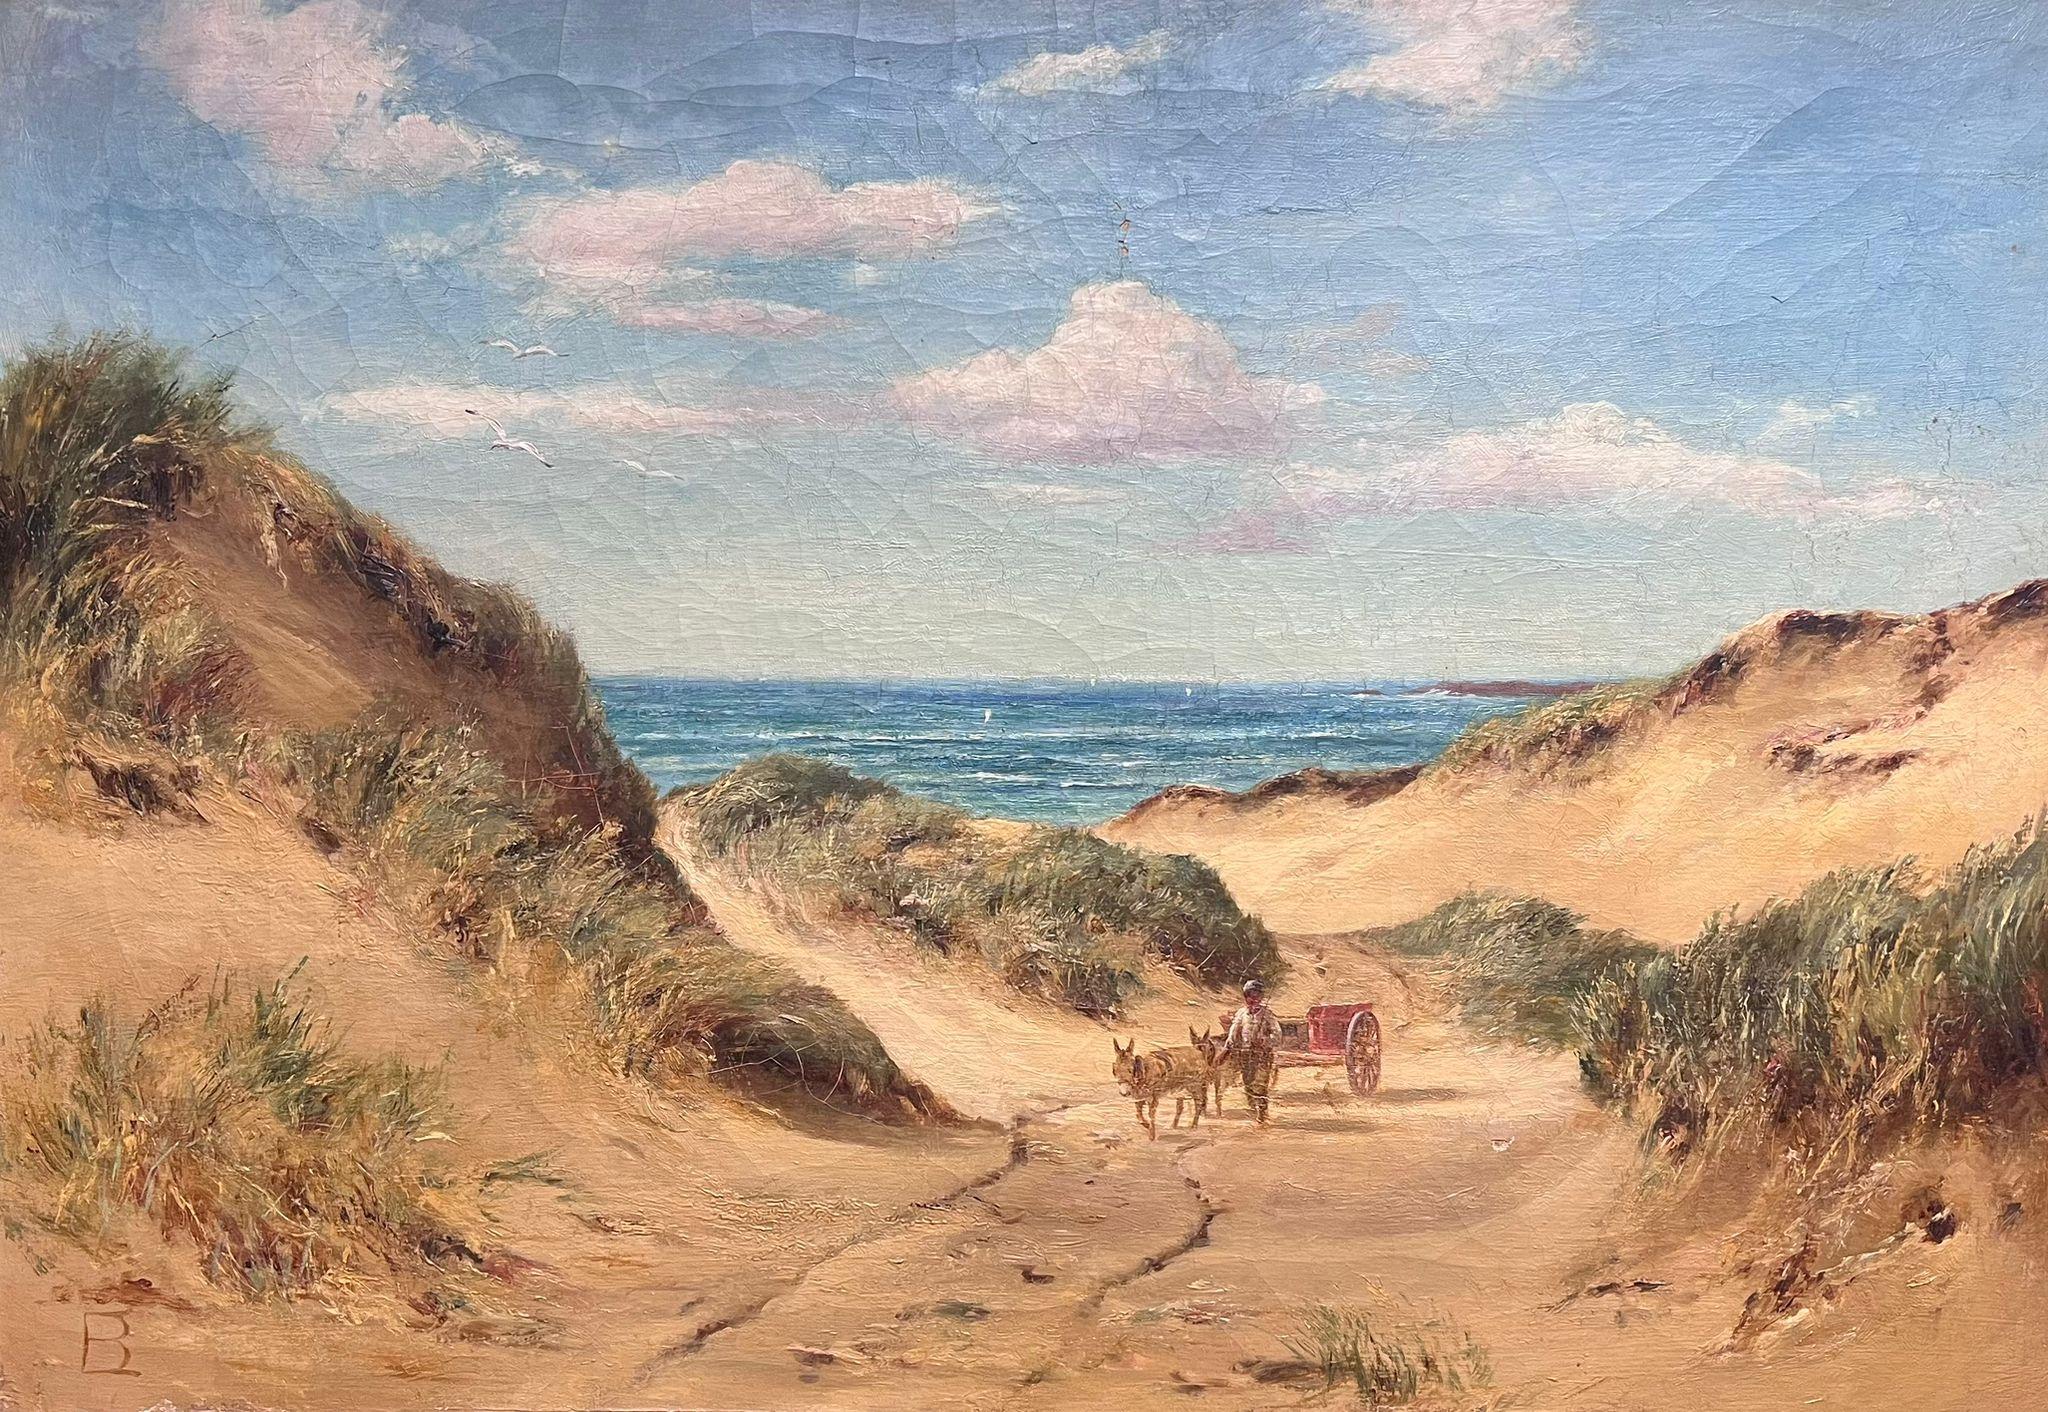 The Beach Cart
British artist, late 19th century
signed with monogram lower corner
oil on canvas, framed
framed: 30 x 41 inches
canvas: 25 x 36 inches
provenance: private collection, England
condition: overall good and sound condition, slight